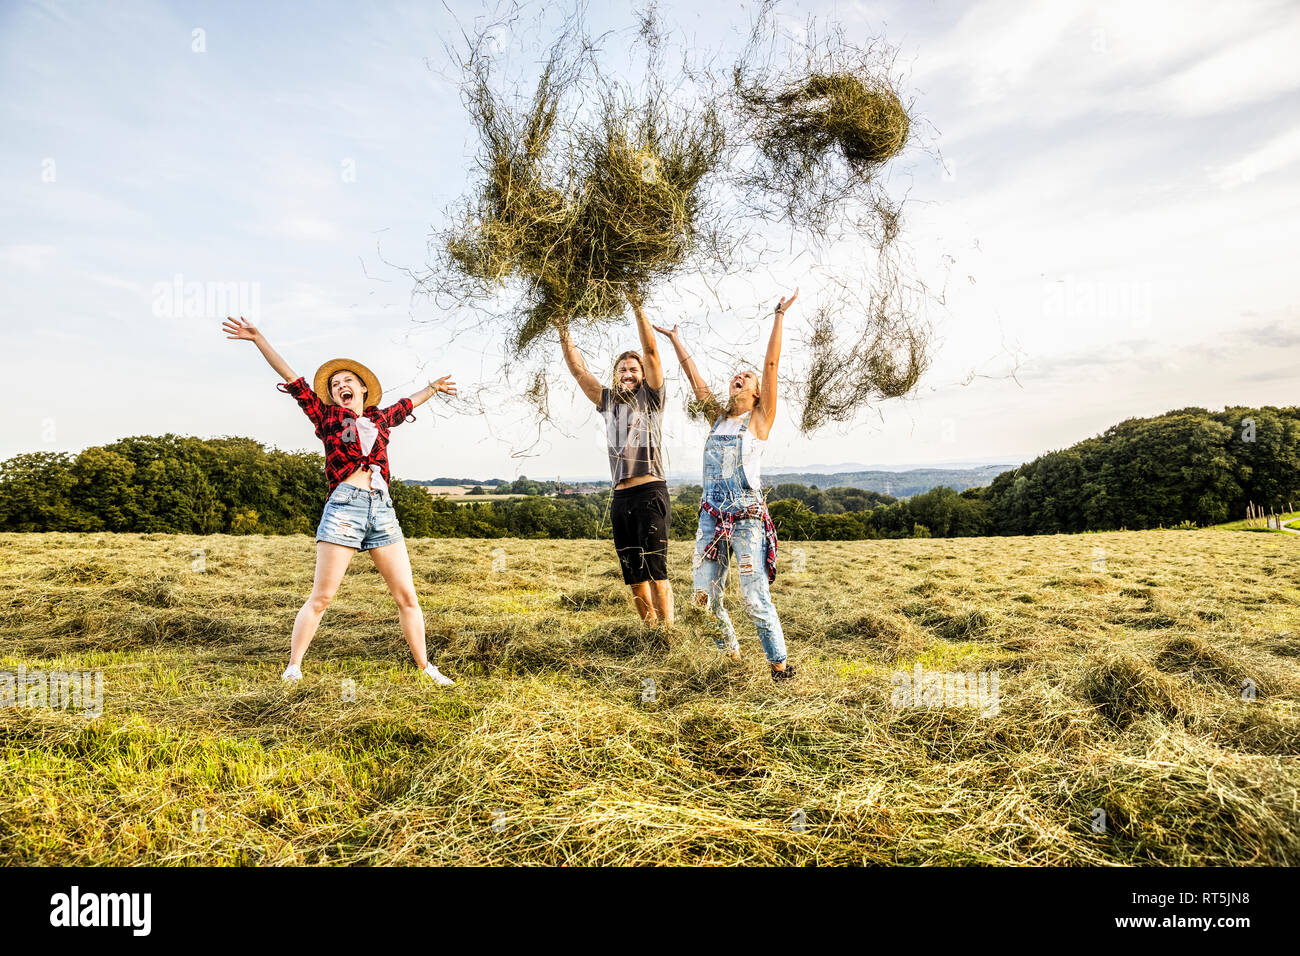 Carefree friends throwing hay in a field Stock Photo